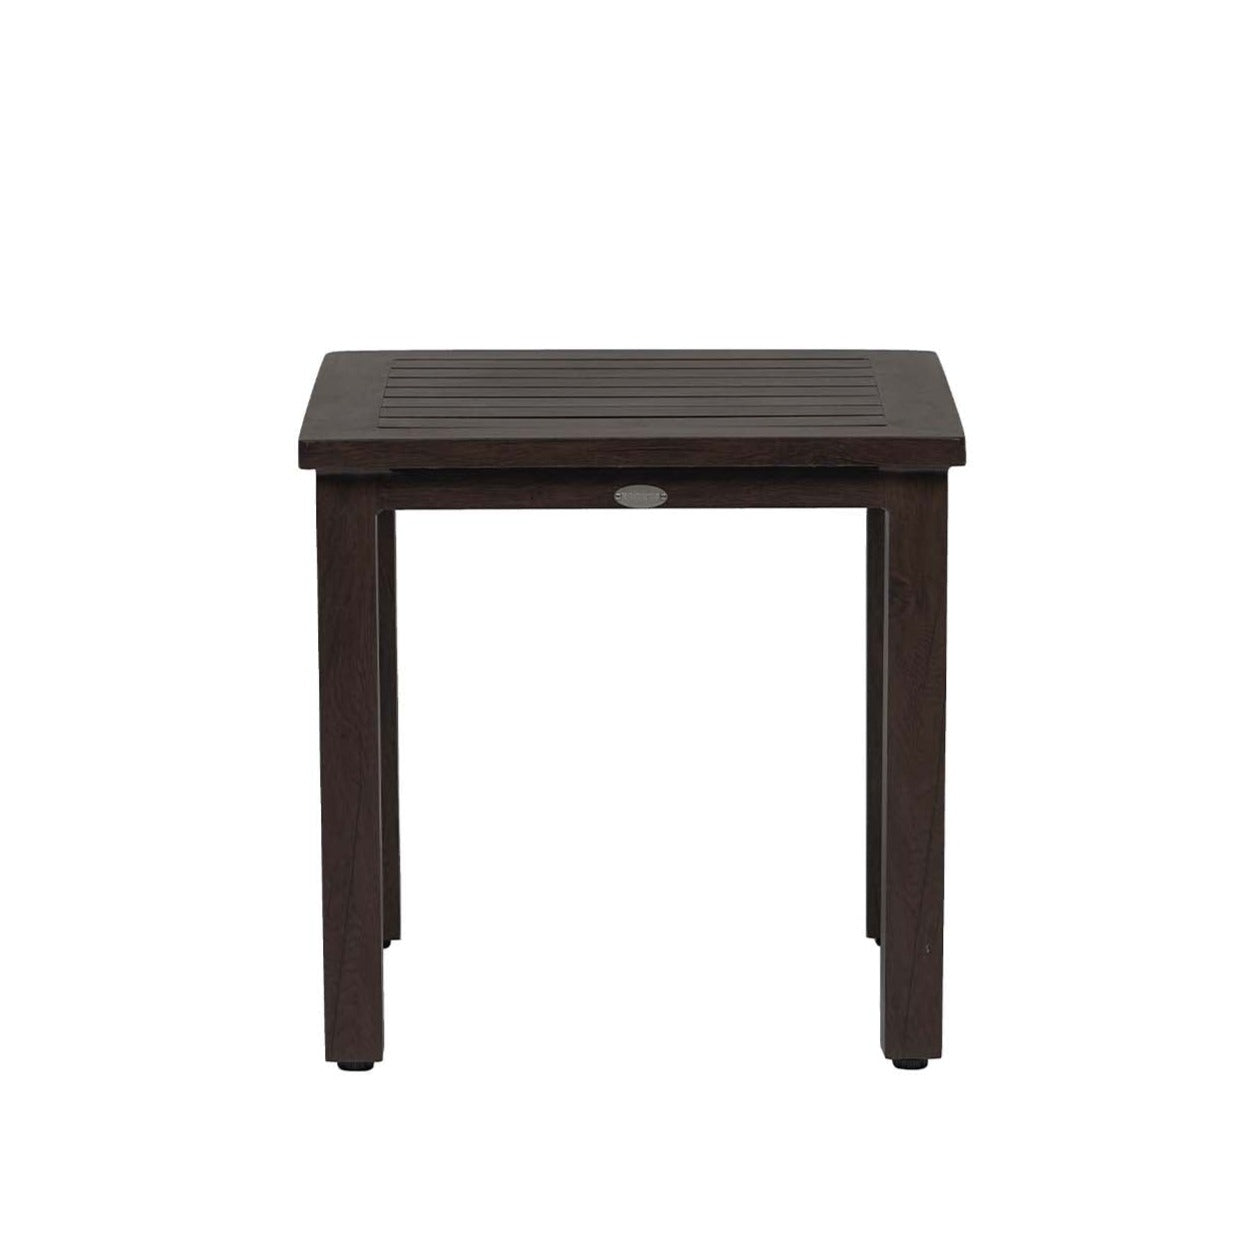 Ratana Canbria End Table in Hessonite Garnet 12038945